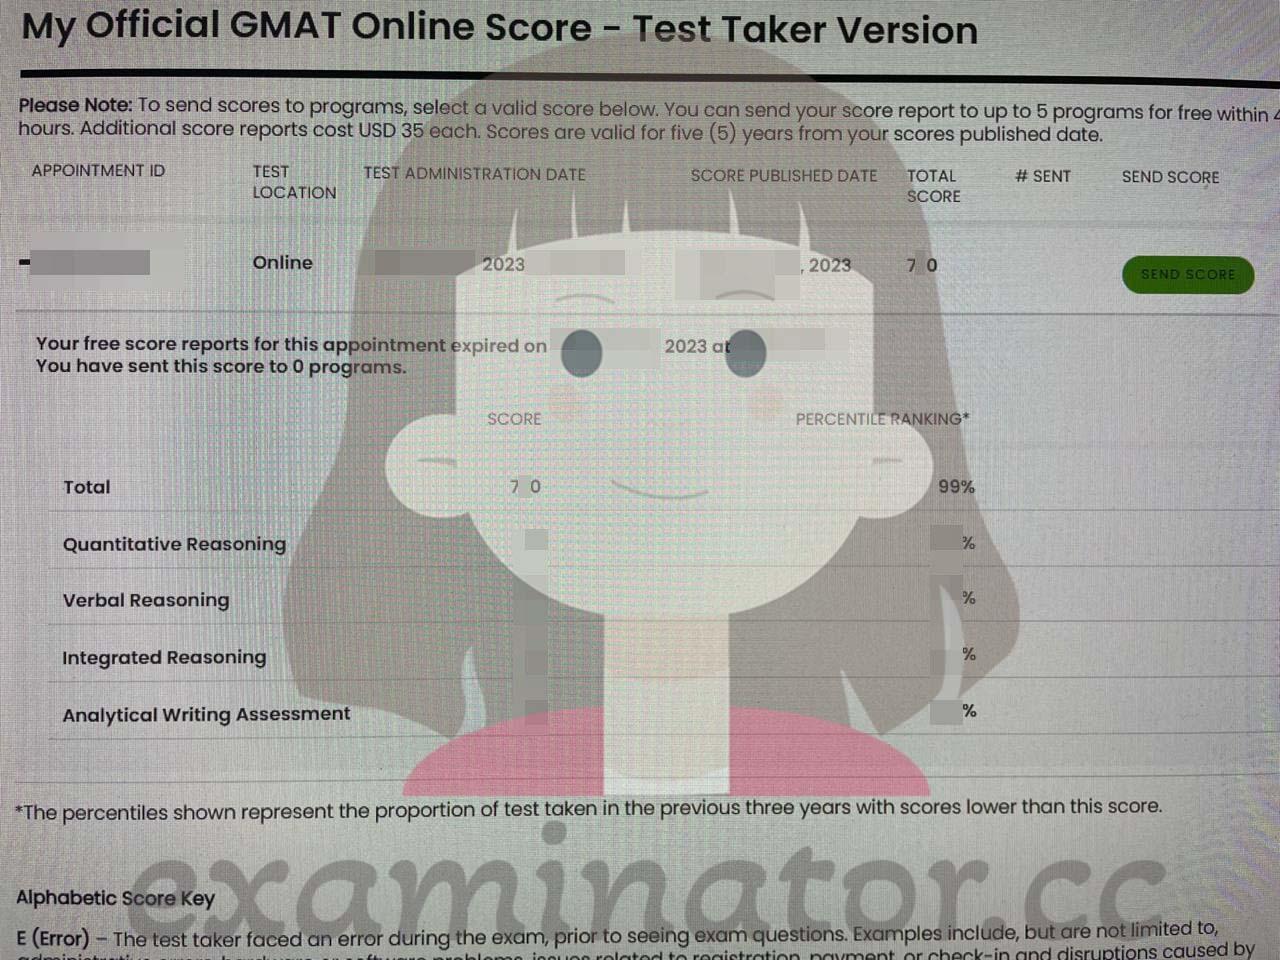 🇺🇸 "Official report is out!!! I really really really appreciate it 😇" Sweet Victory and Tips in USDC: Cheers to Our LA Client's 750+ Triumph! Thanks to Our GMAT Proxy Exam Service 🌟